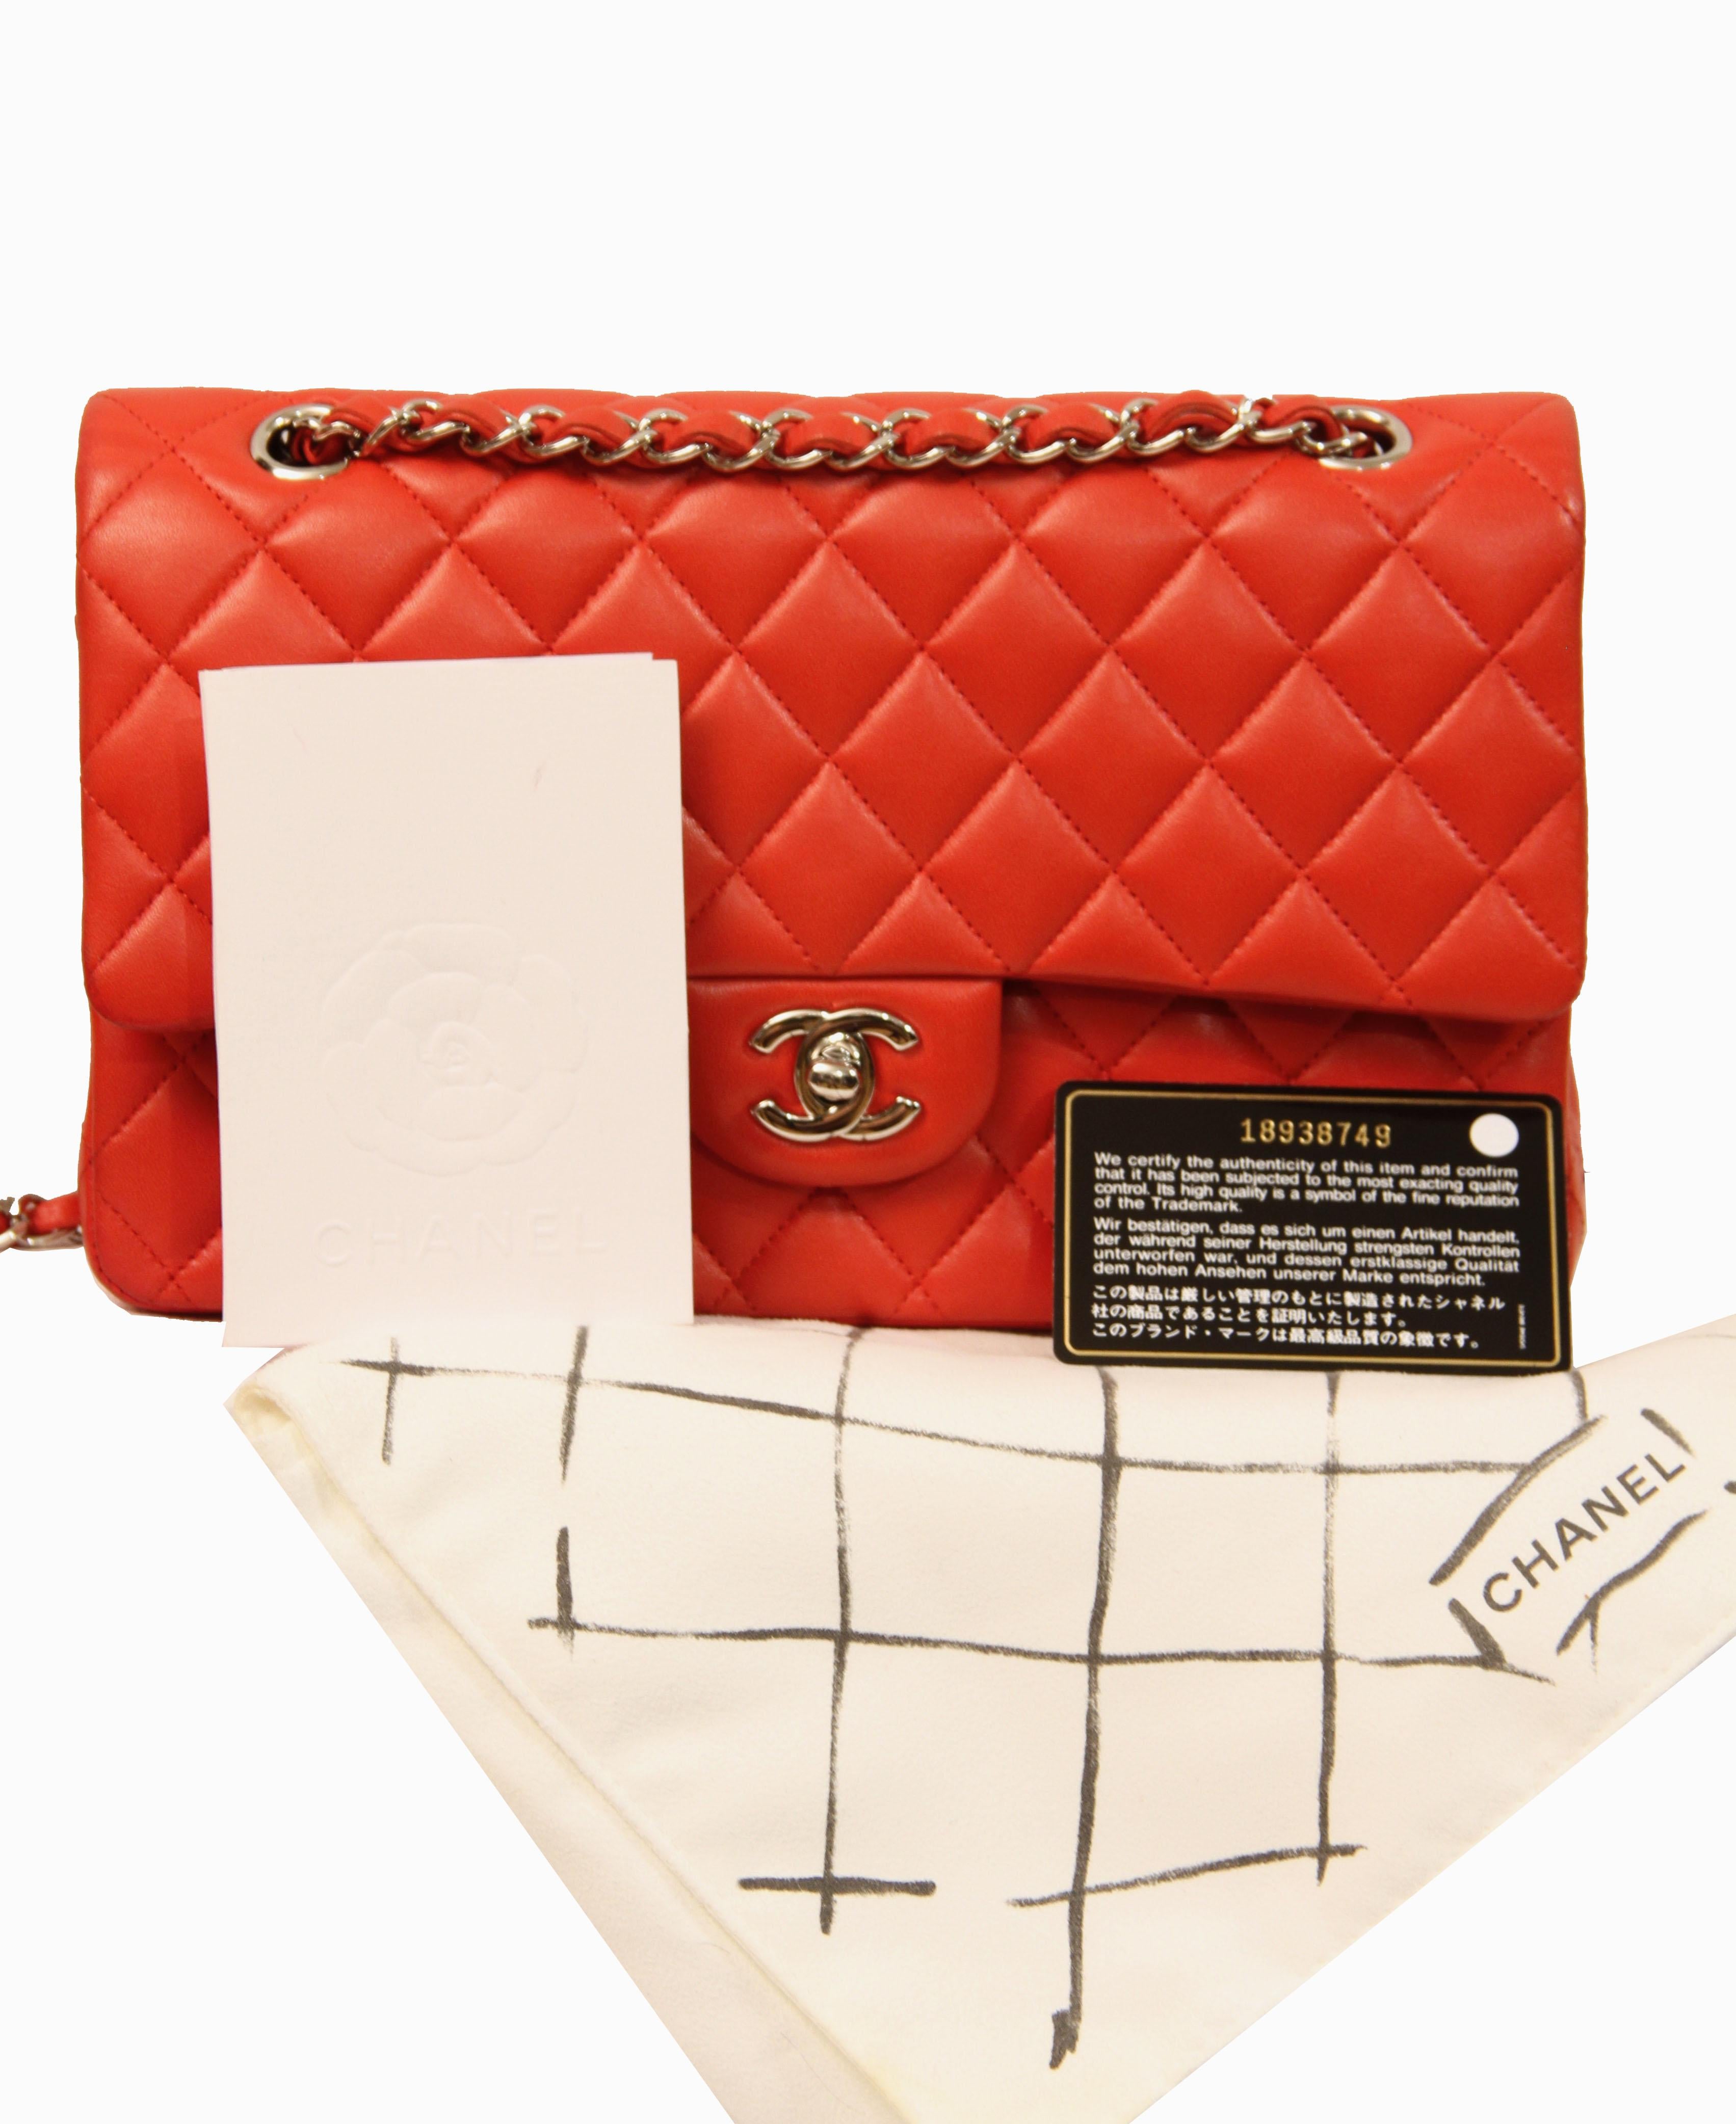 Chanel Classic Double Flap Red Lambskin Leather Bag 9